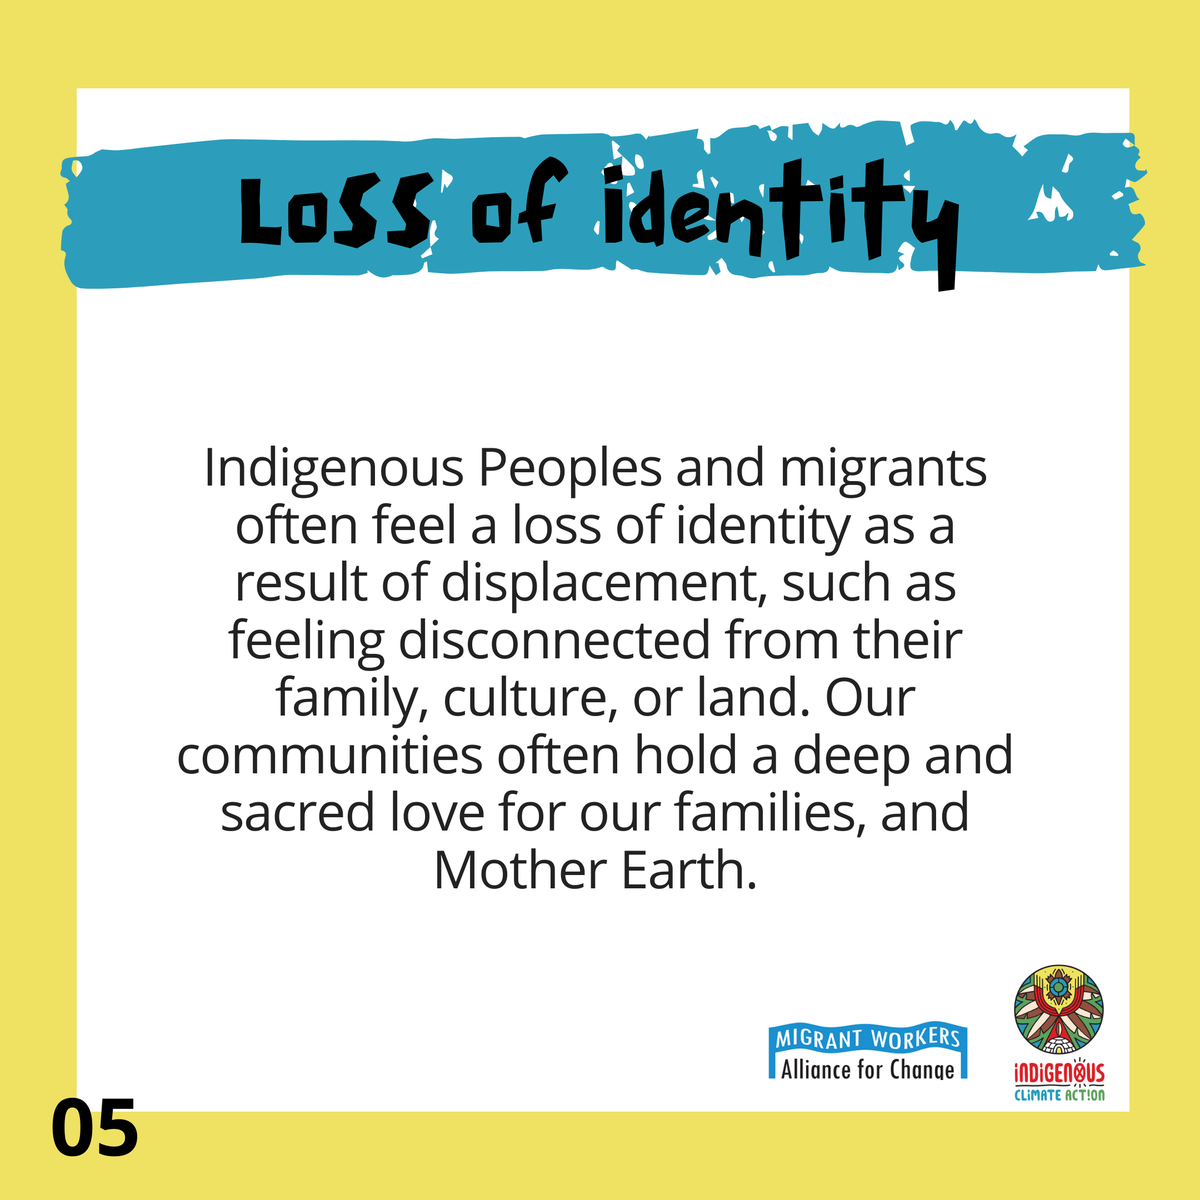 Indigenous Peoples and migrants often feel a loss of identity as a result of displacement, such as feeling disconnected from their family, culture, or land. Our communities often hold a deep and sacred love for our families, and Mother Earth (5/9)